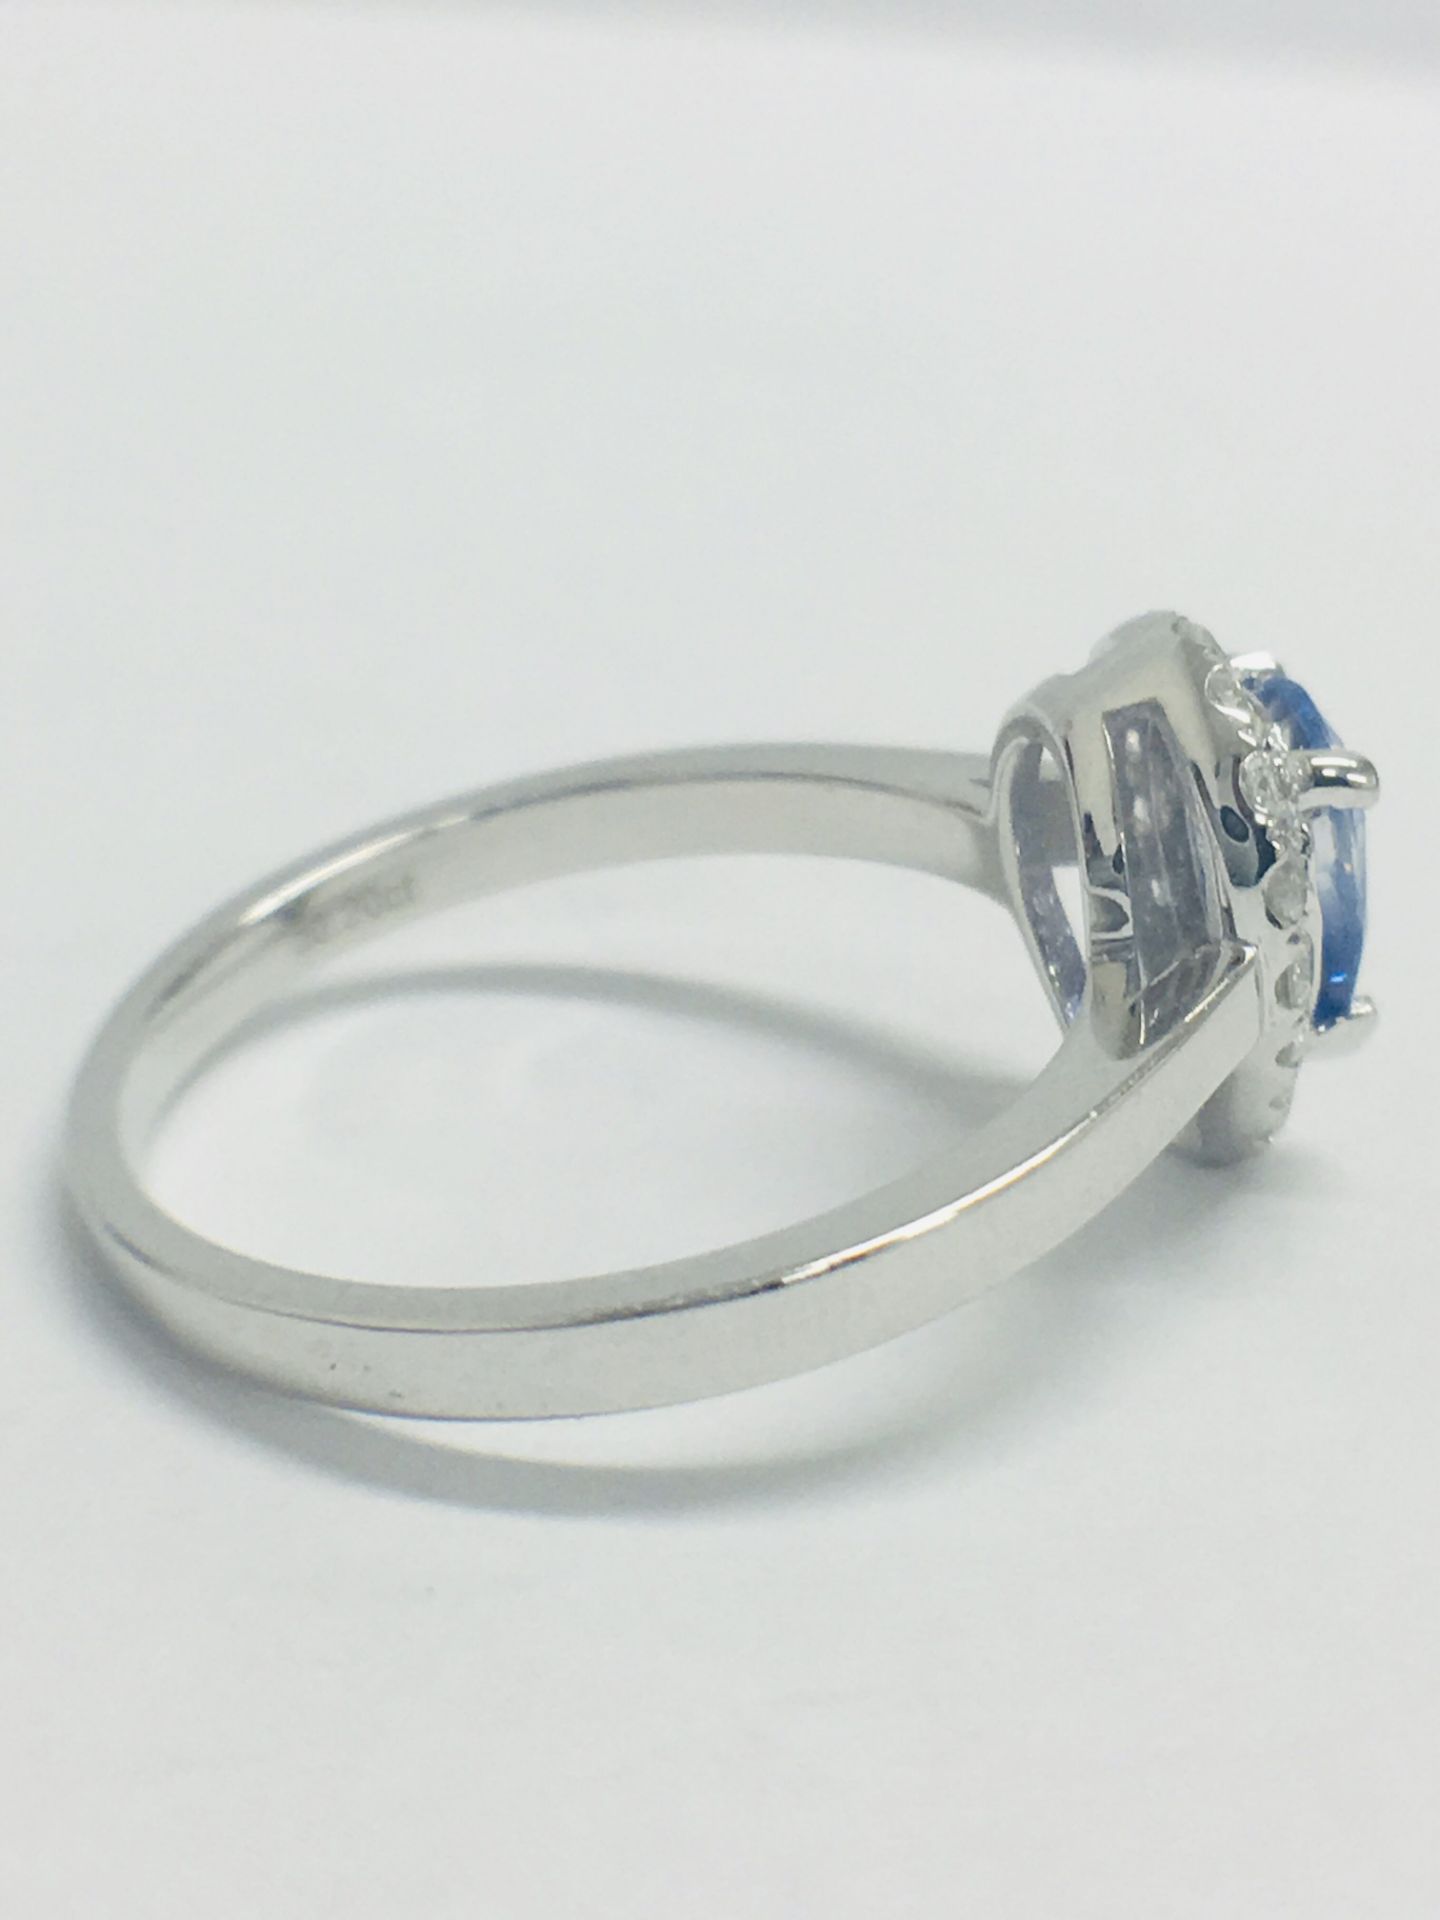 14Ct White Gold Sapphire And Diamond Ring - Image 6 of 10